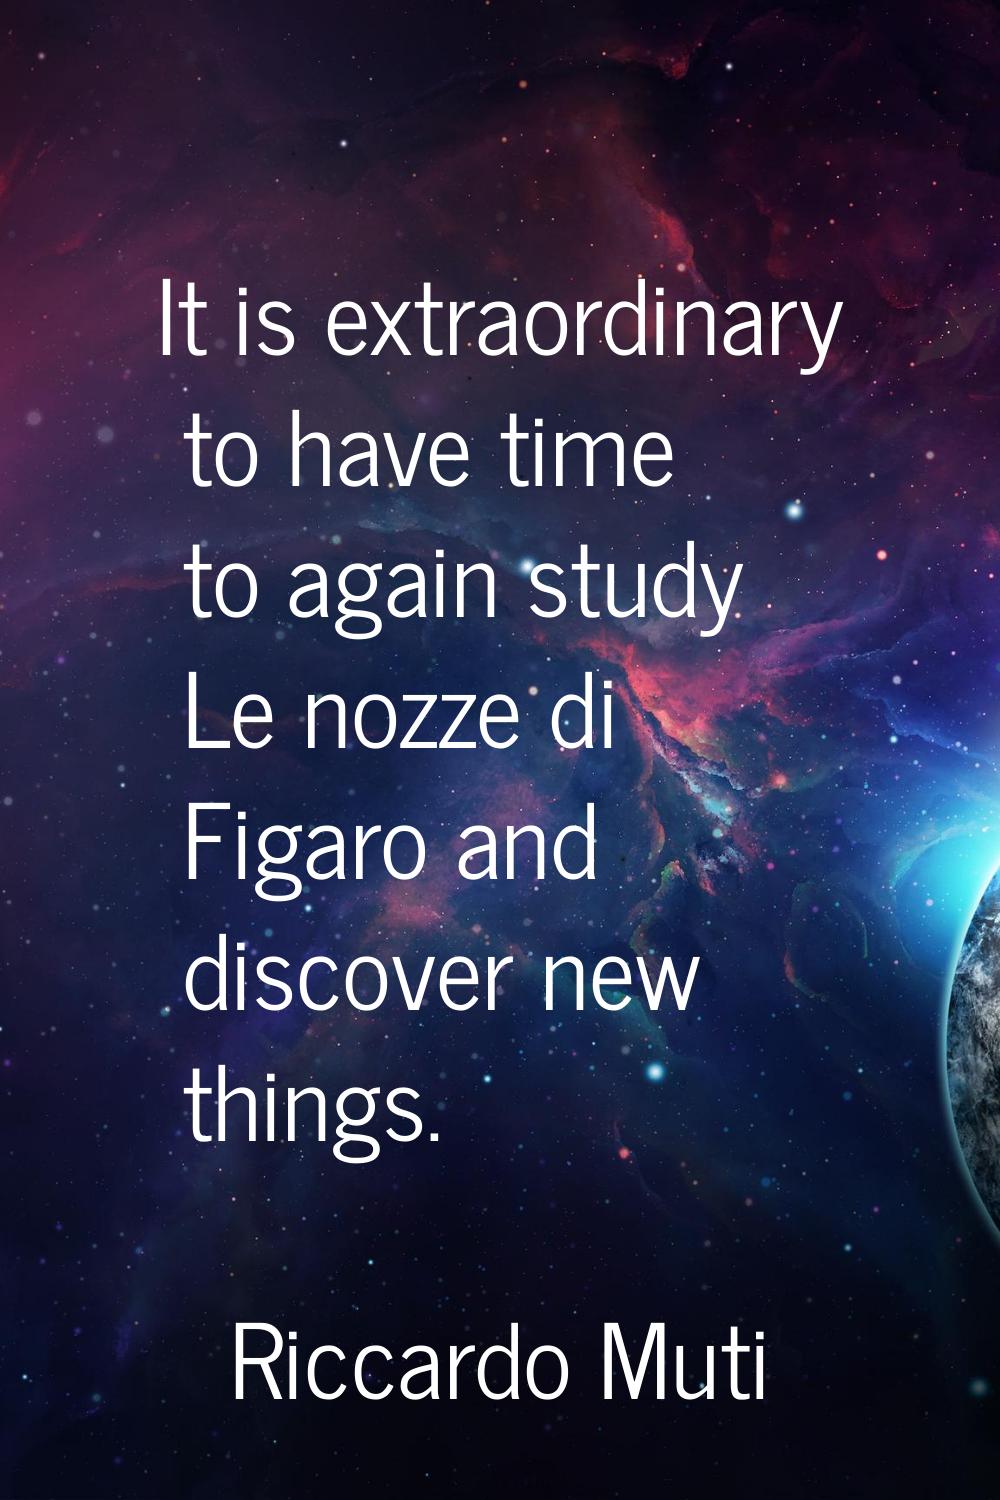 It is extraordinary to have time to again study Le nozze di Figaro and discover new things.